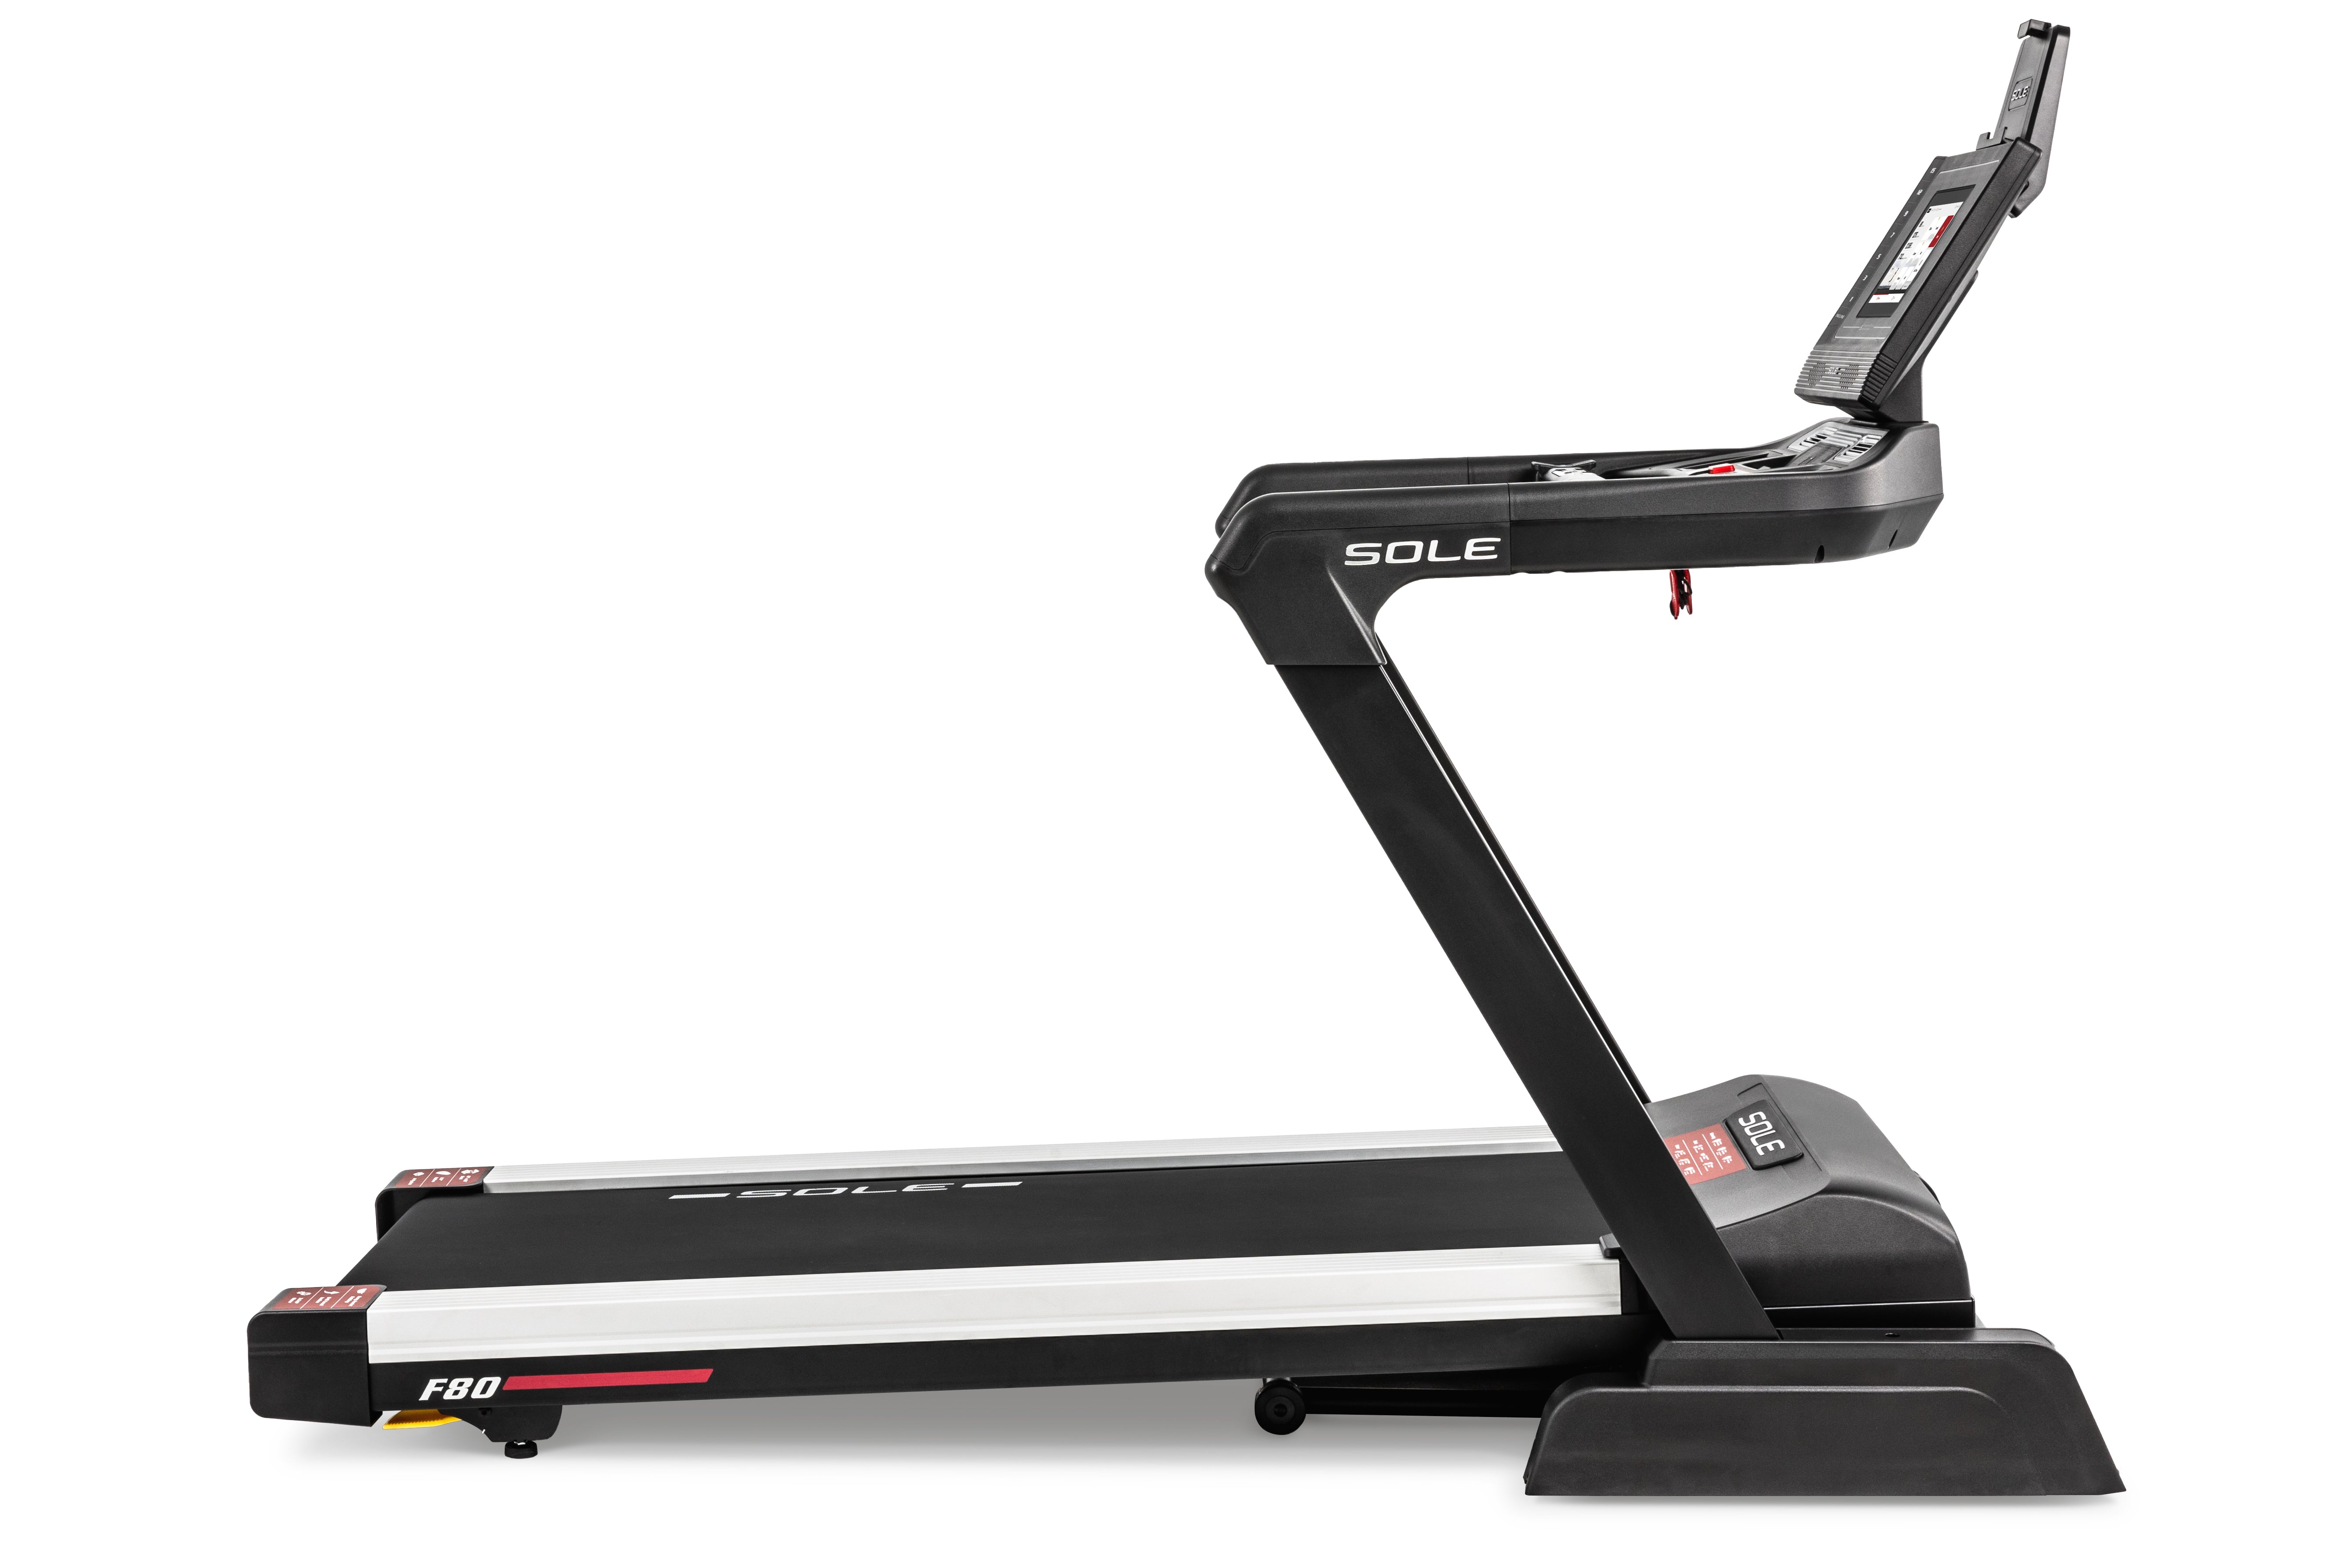 Sole F80 Treadmill side view with running surface inclined.